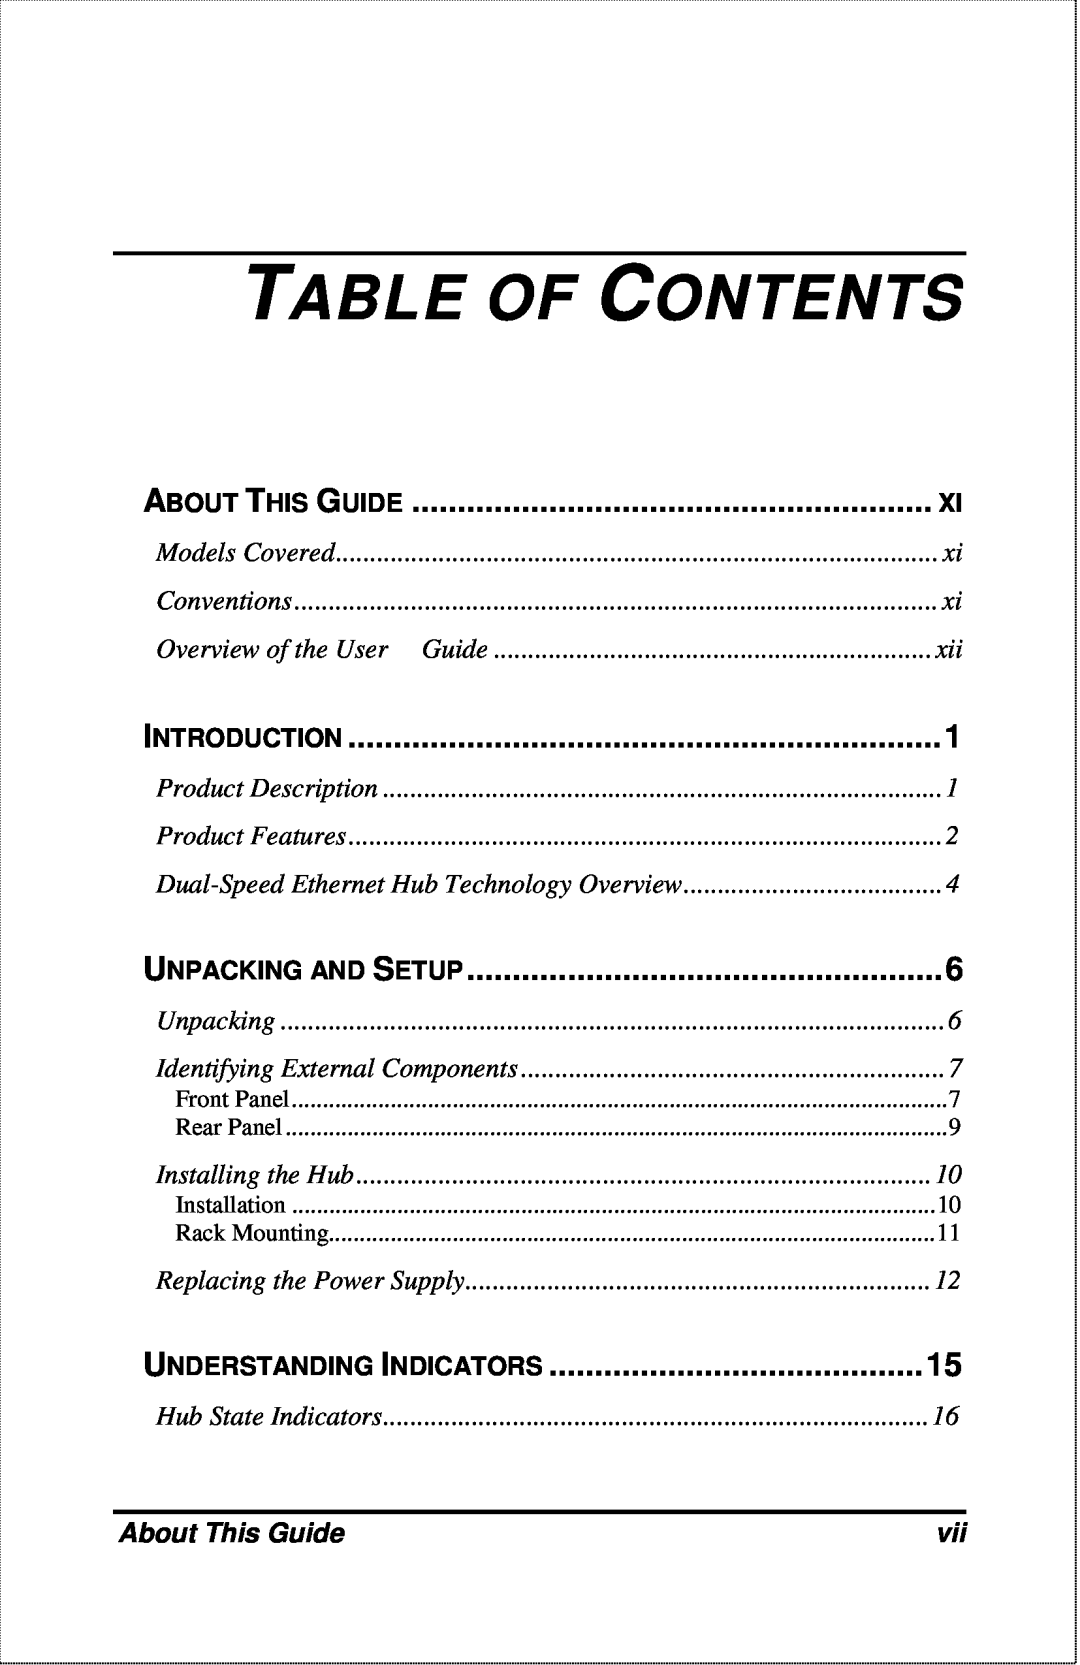 D-Link DFE-2600 manual Table Of Contents, About This Guide, Introduction, Unpacking And Setup, Understanding Indicators 